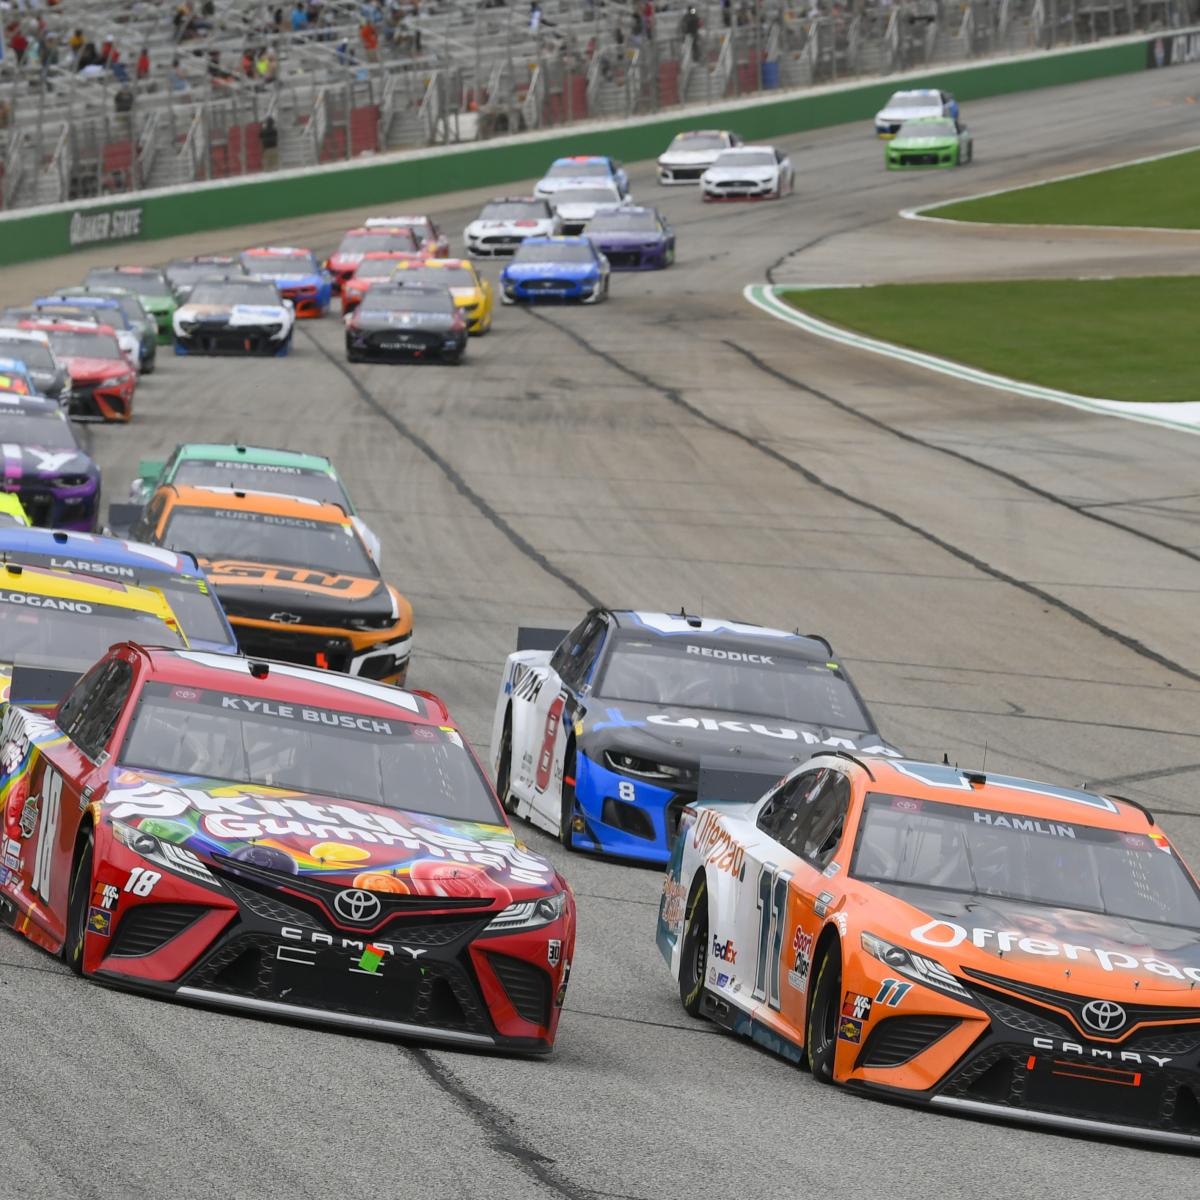 NASCAR at New Hampshire 2021: Odds, TV Schedule, Live Stream and